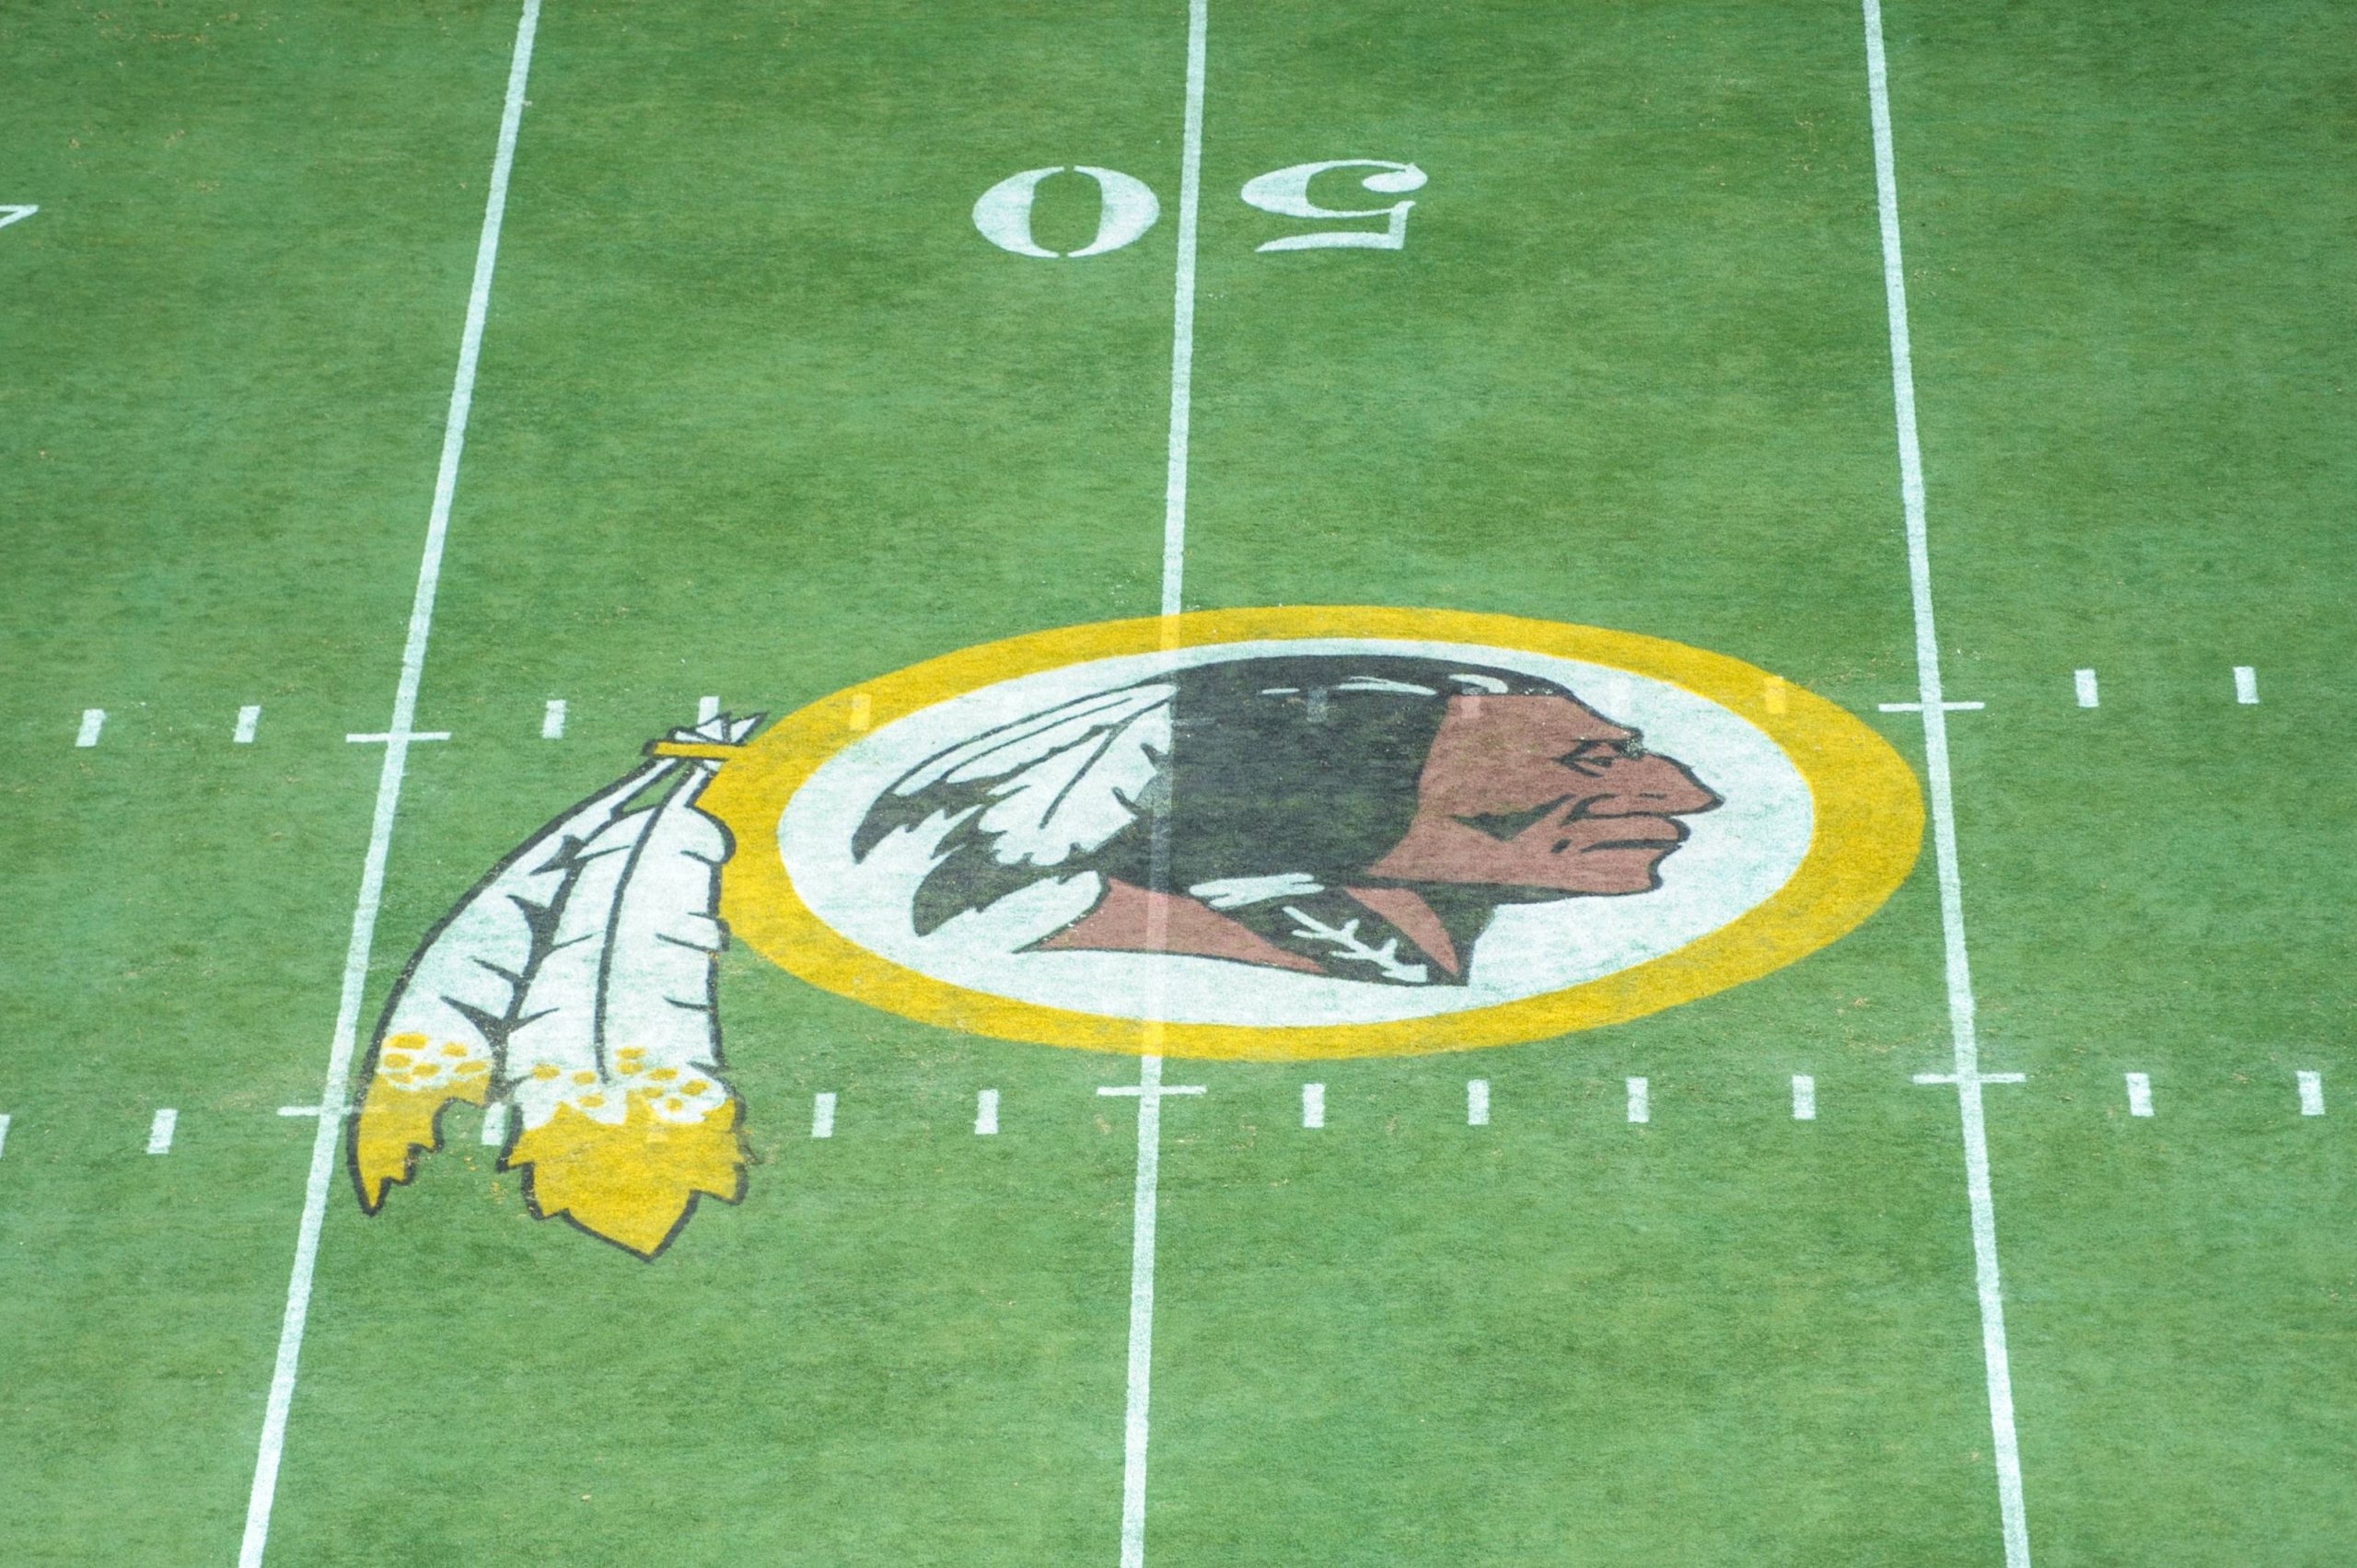 SEP 14 2014 The Redskins logo on the center of the field during the season opening matchup of the